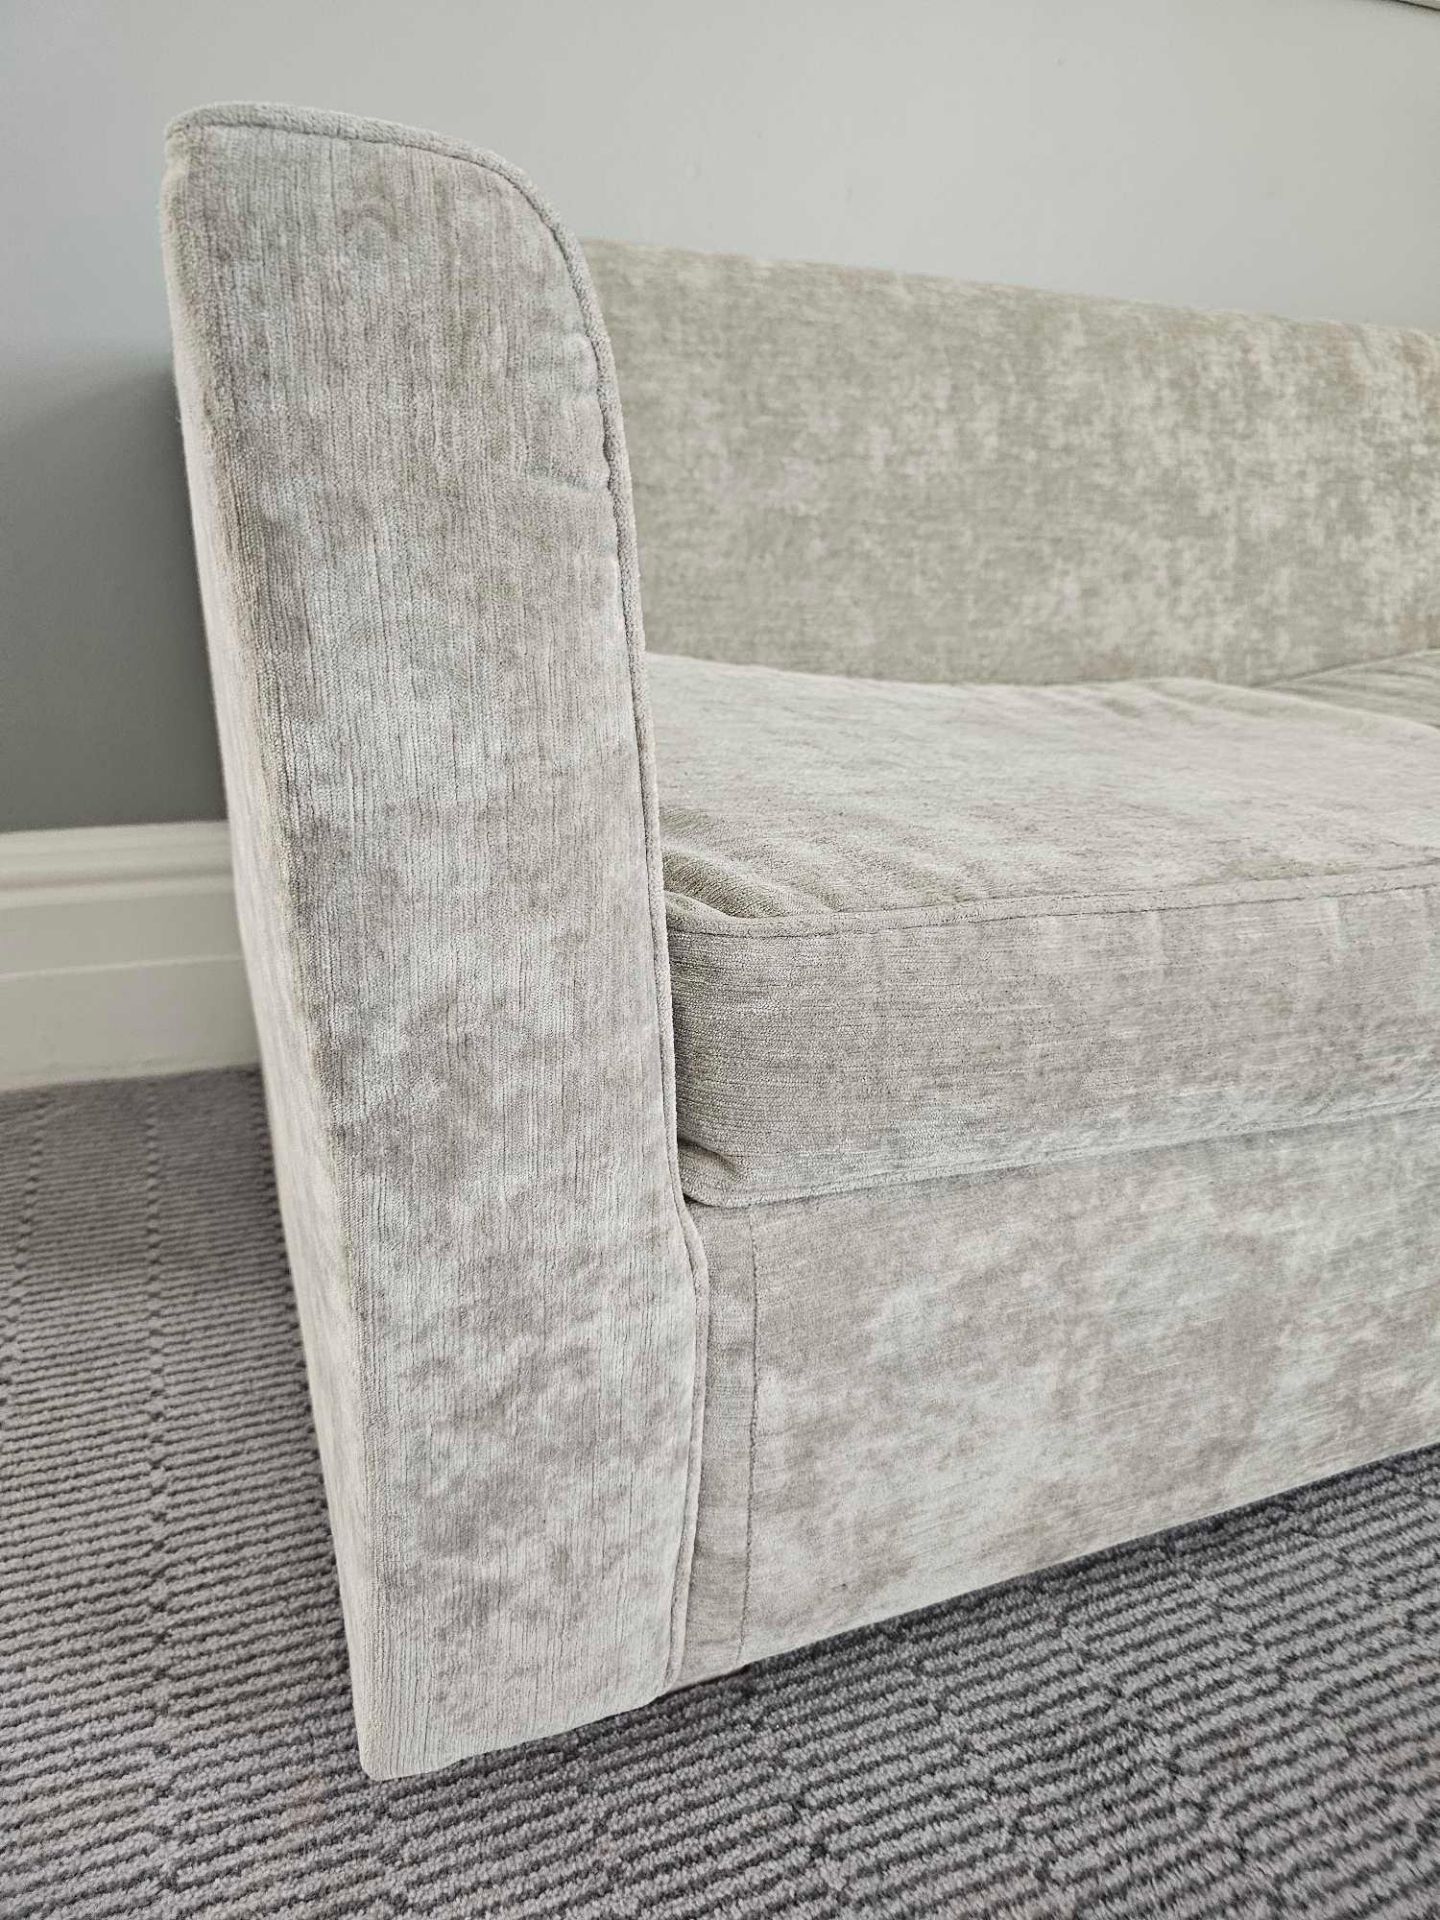 Sofa Bed By Styling Group Italy A Stunning Centrepiece For Any Home That Is Equally Comfortable - Image 3 of 3